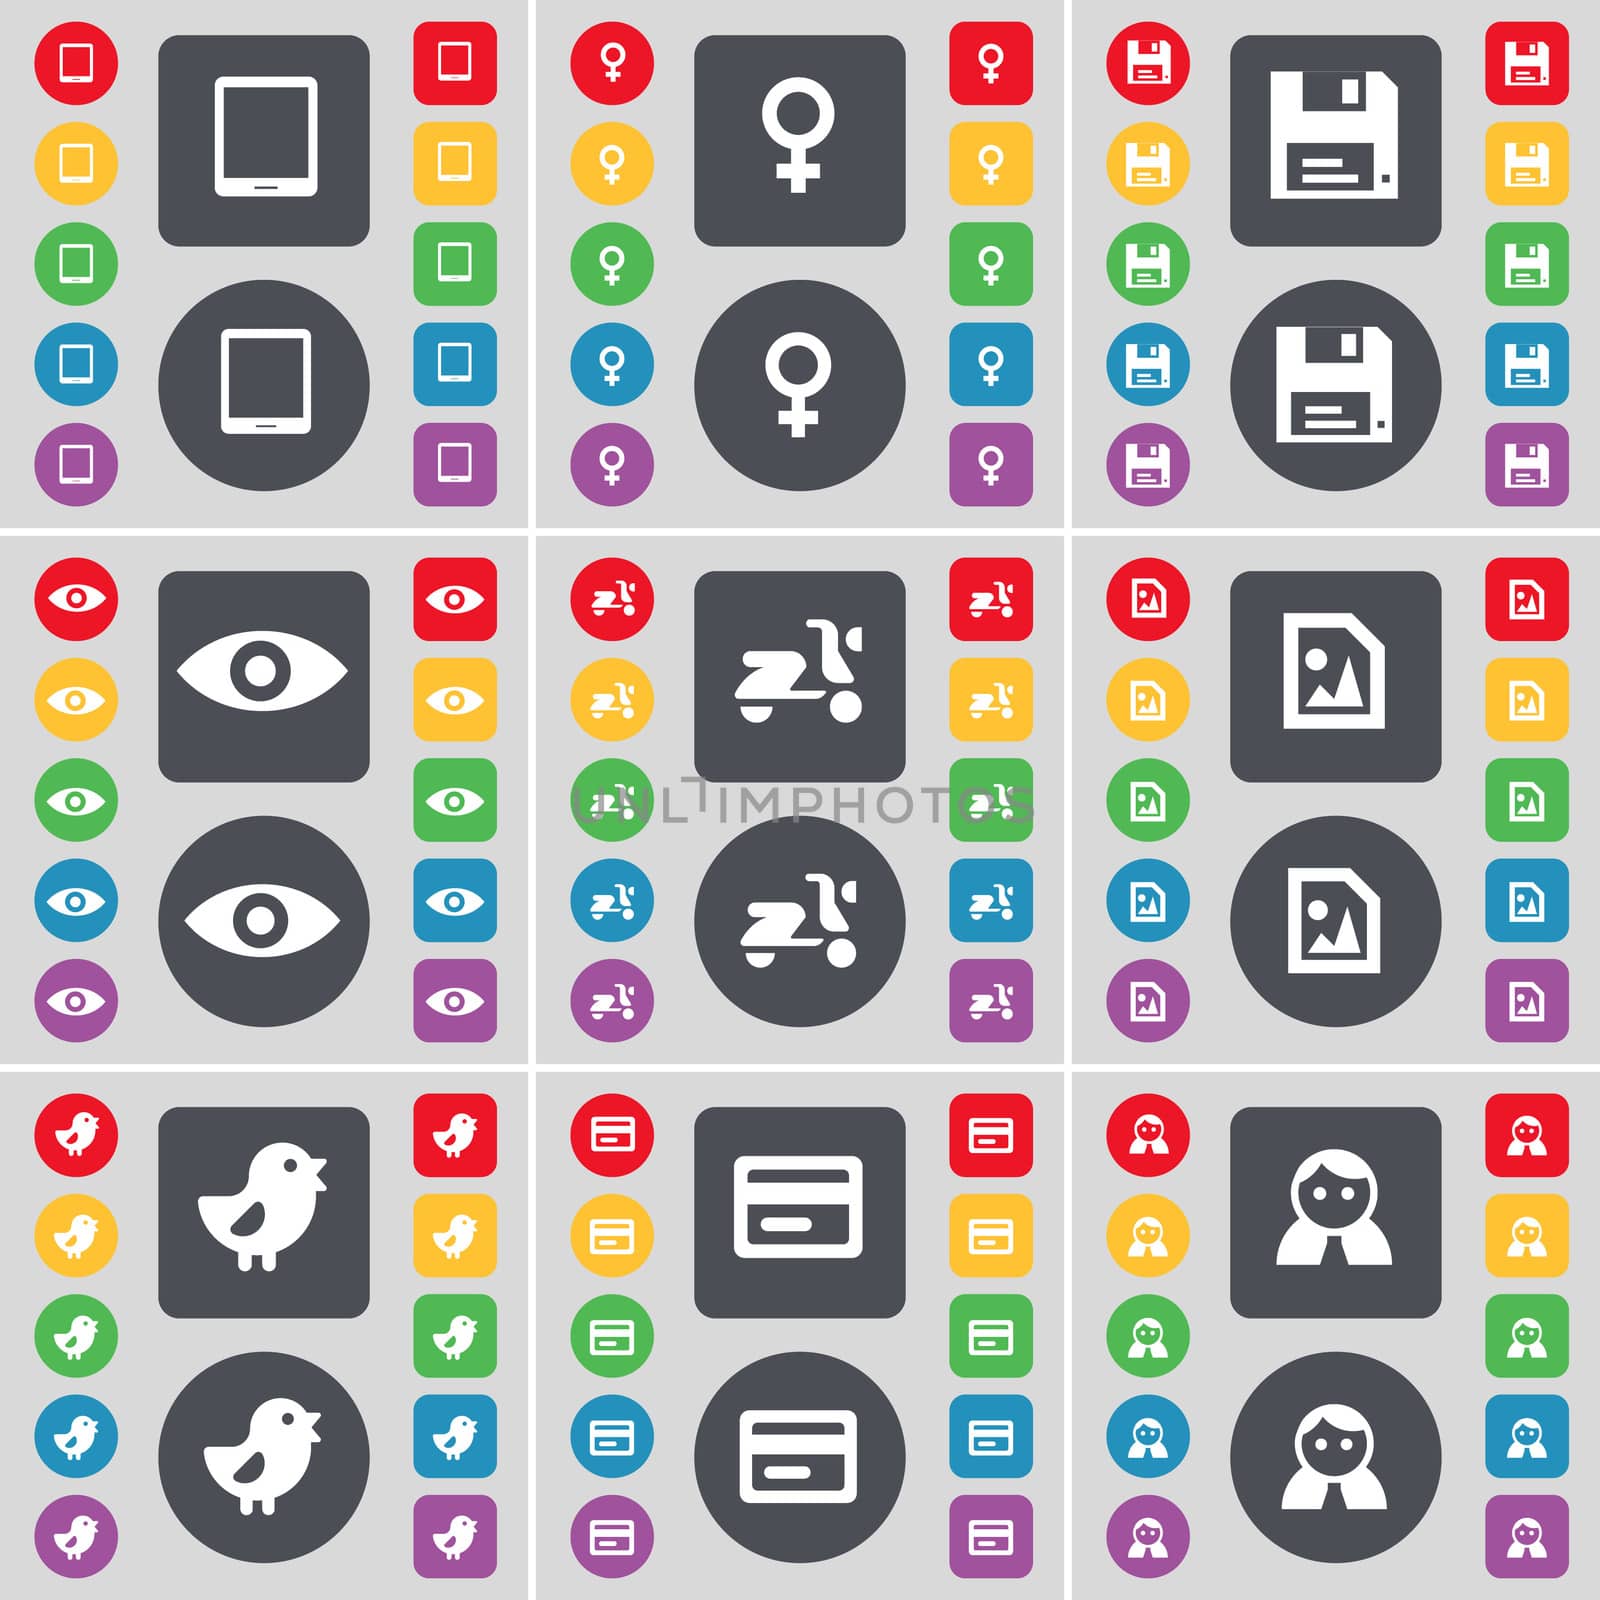 Tablet PC, Venus symbol, Floppy, Vision, Scooter, Media file, Bird, Credit card, Avatar icon symbol. A large set of flat, colored buttons for your design. illustration